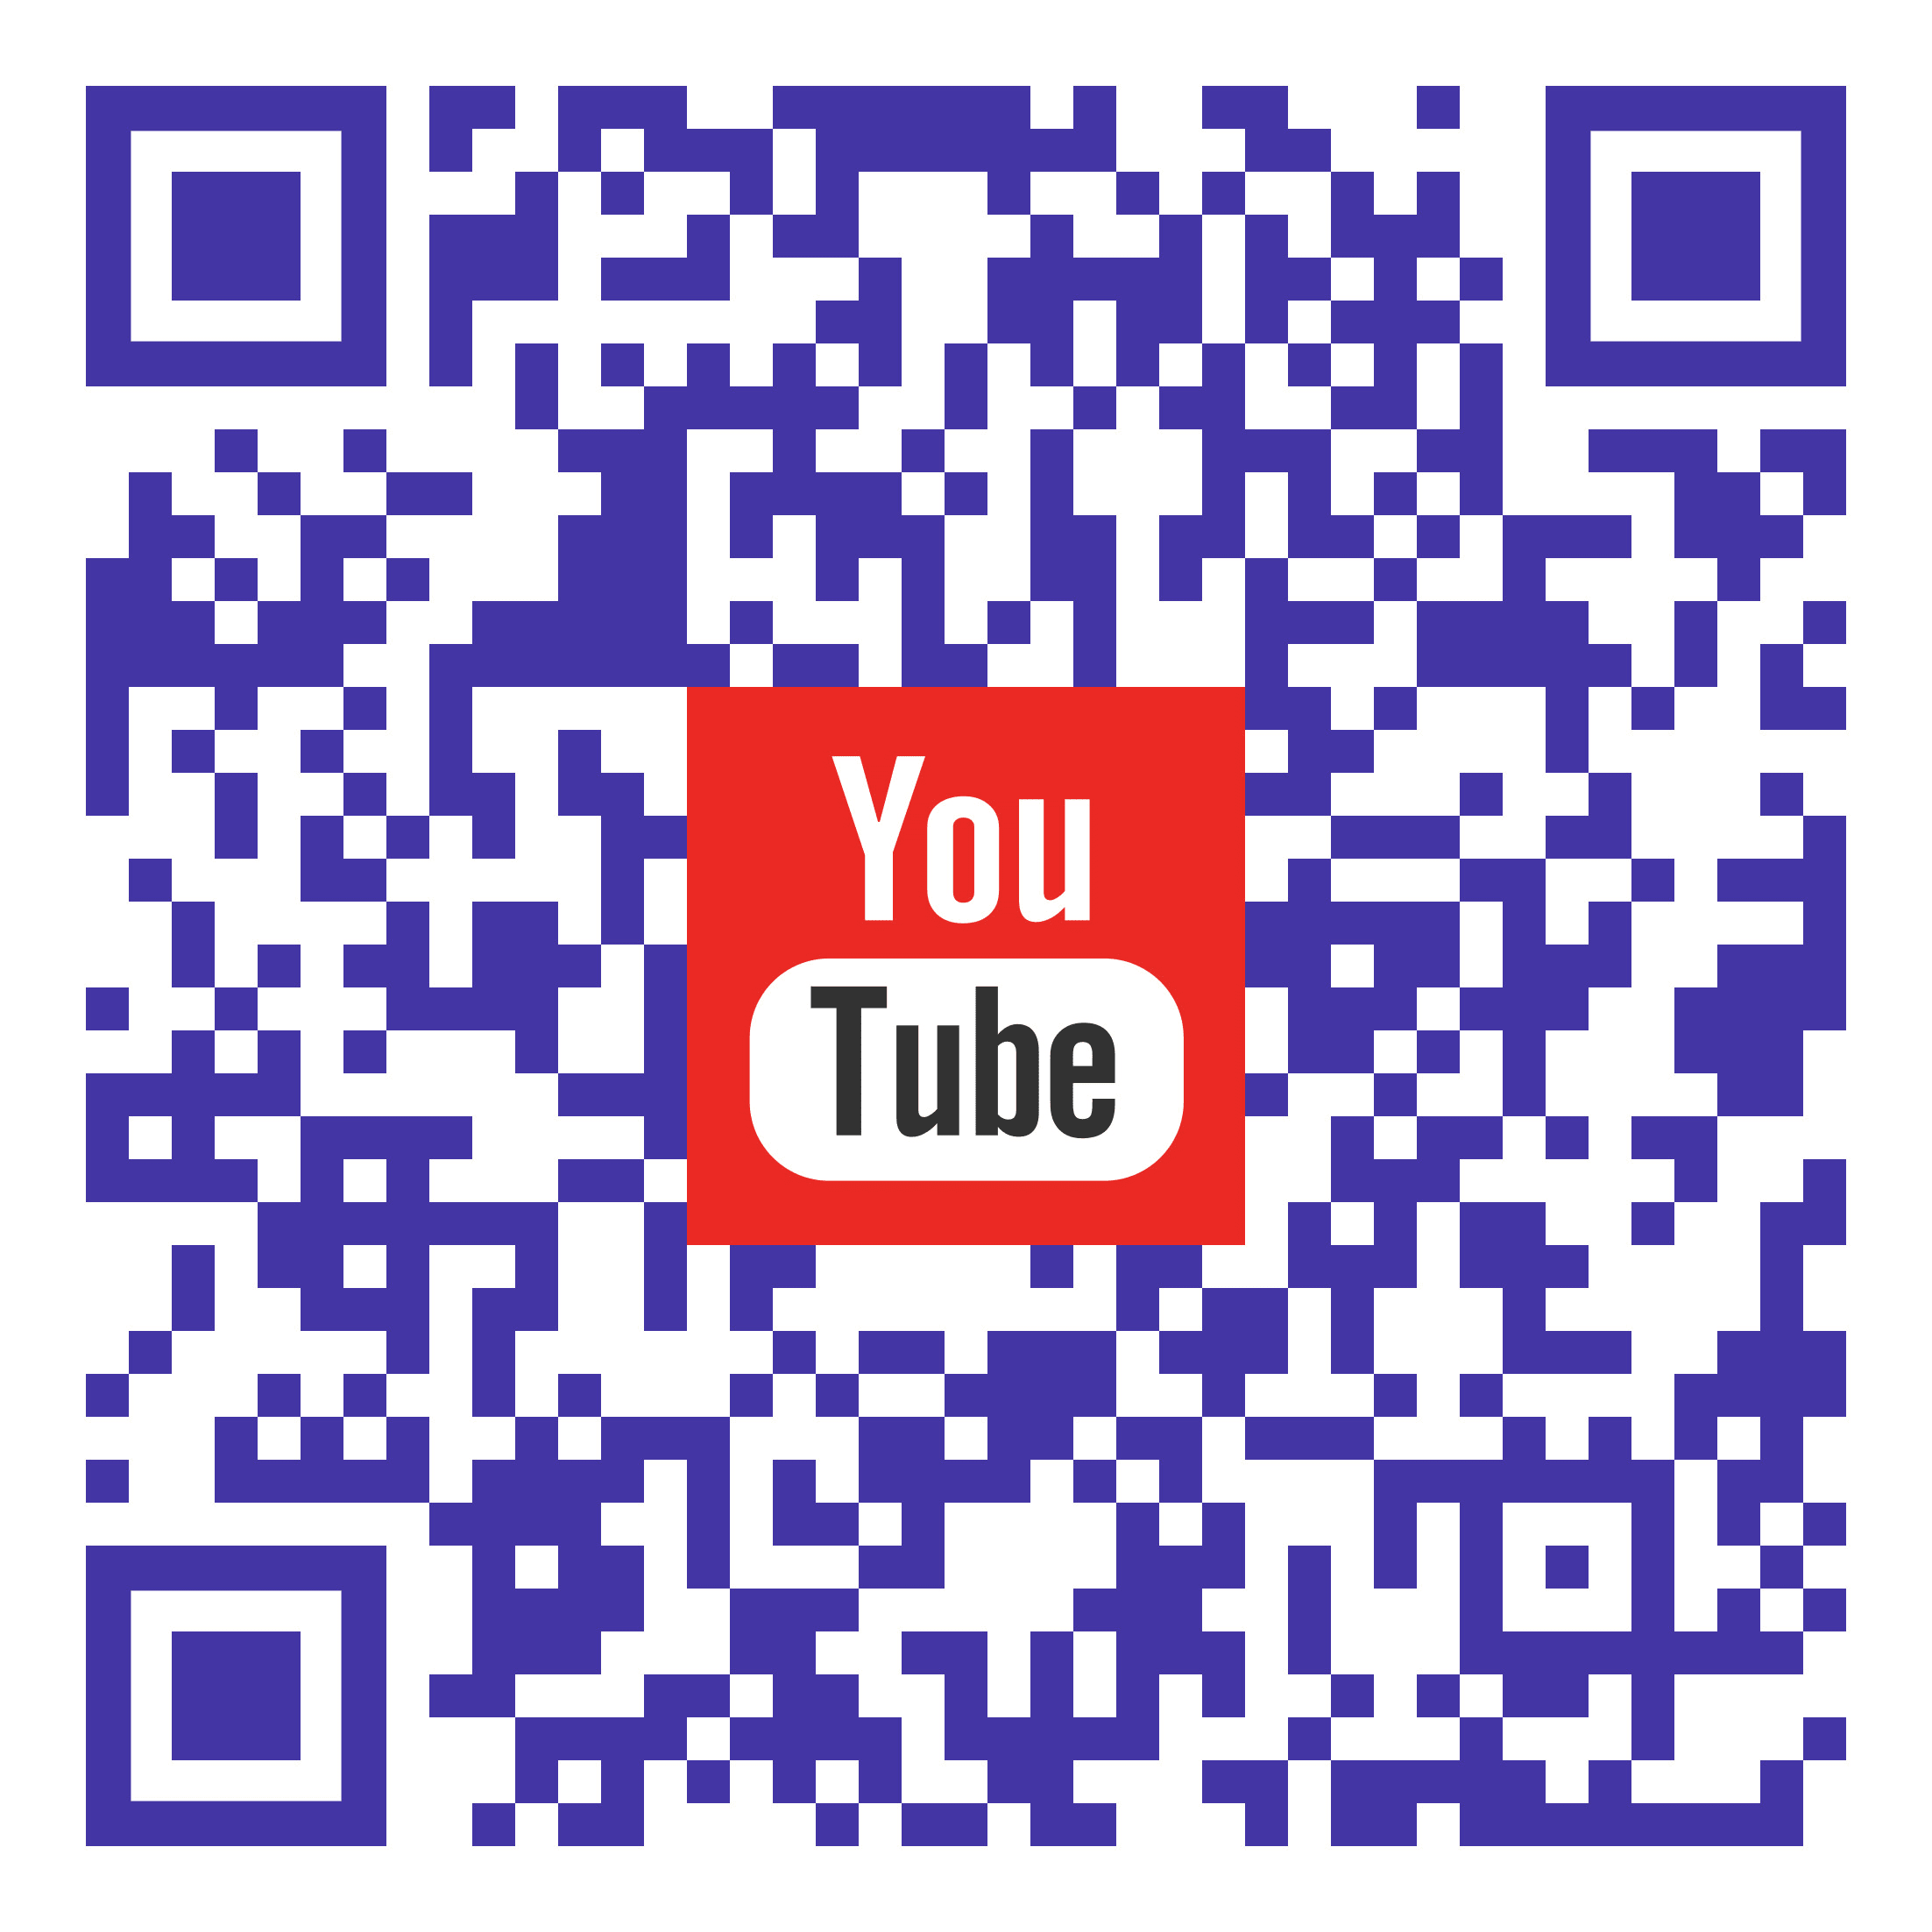 Created Best Class Design Qr Code And Editing Photo For You By Ayush244 Fiverr